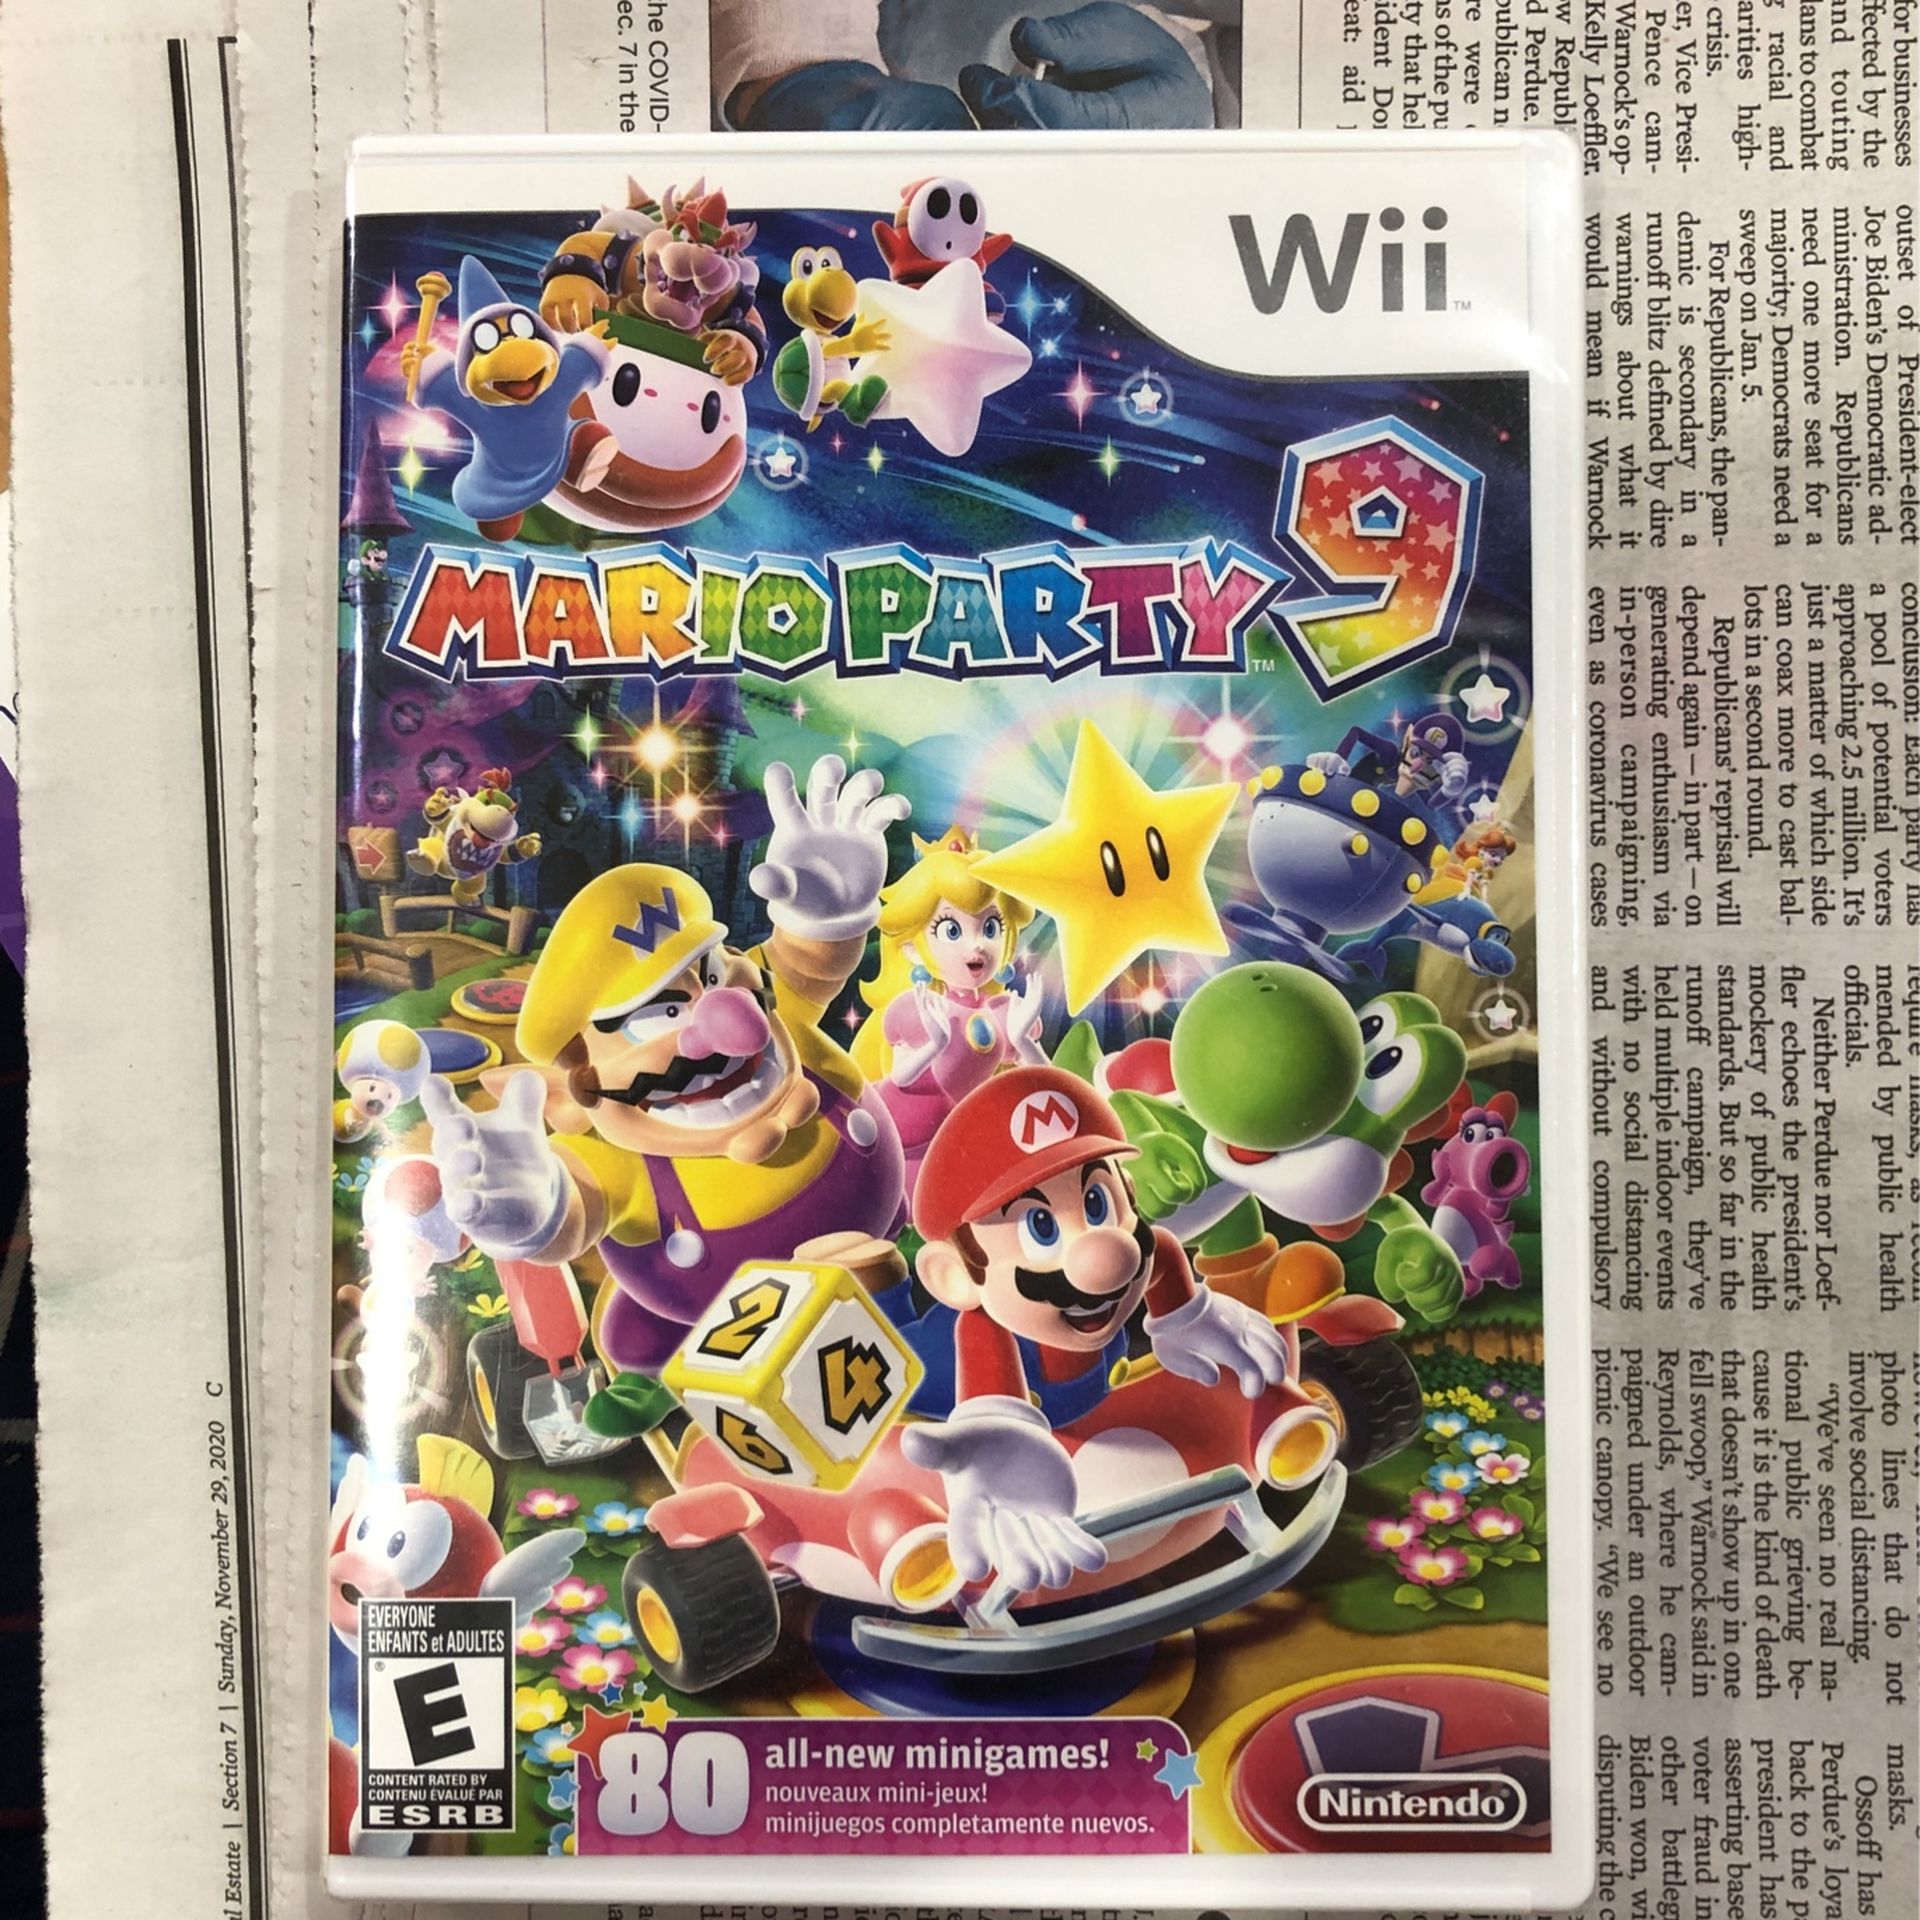 WII Mario party9 brand new game —UNopened /still in factory sealed packaging